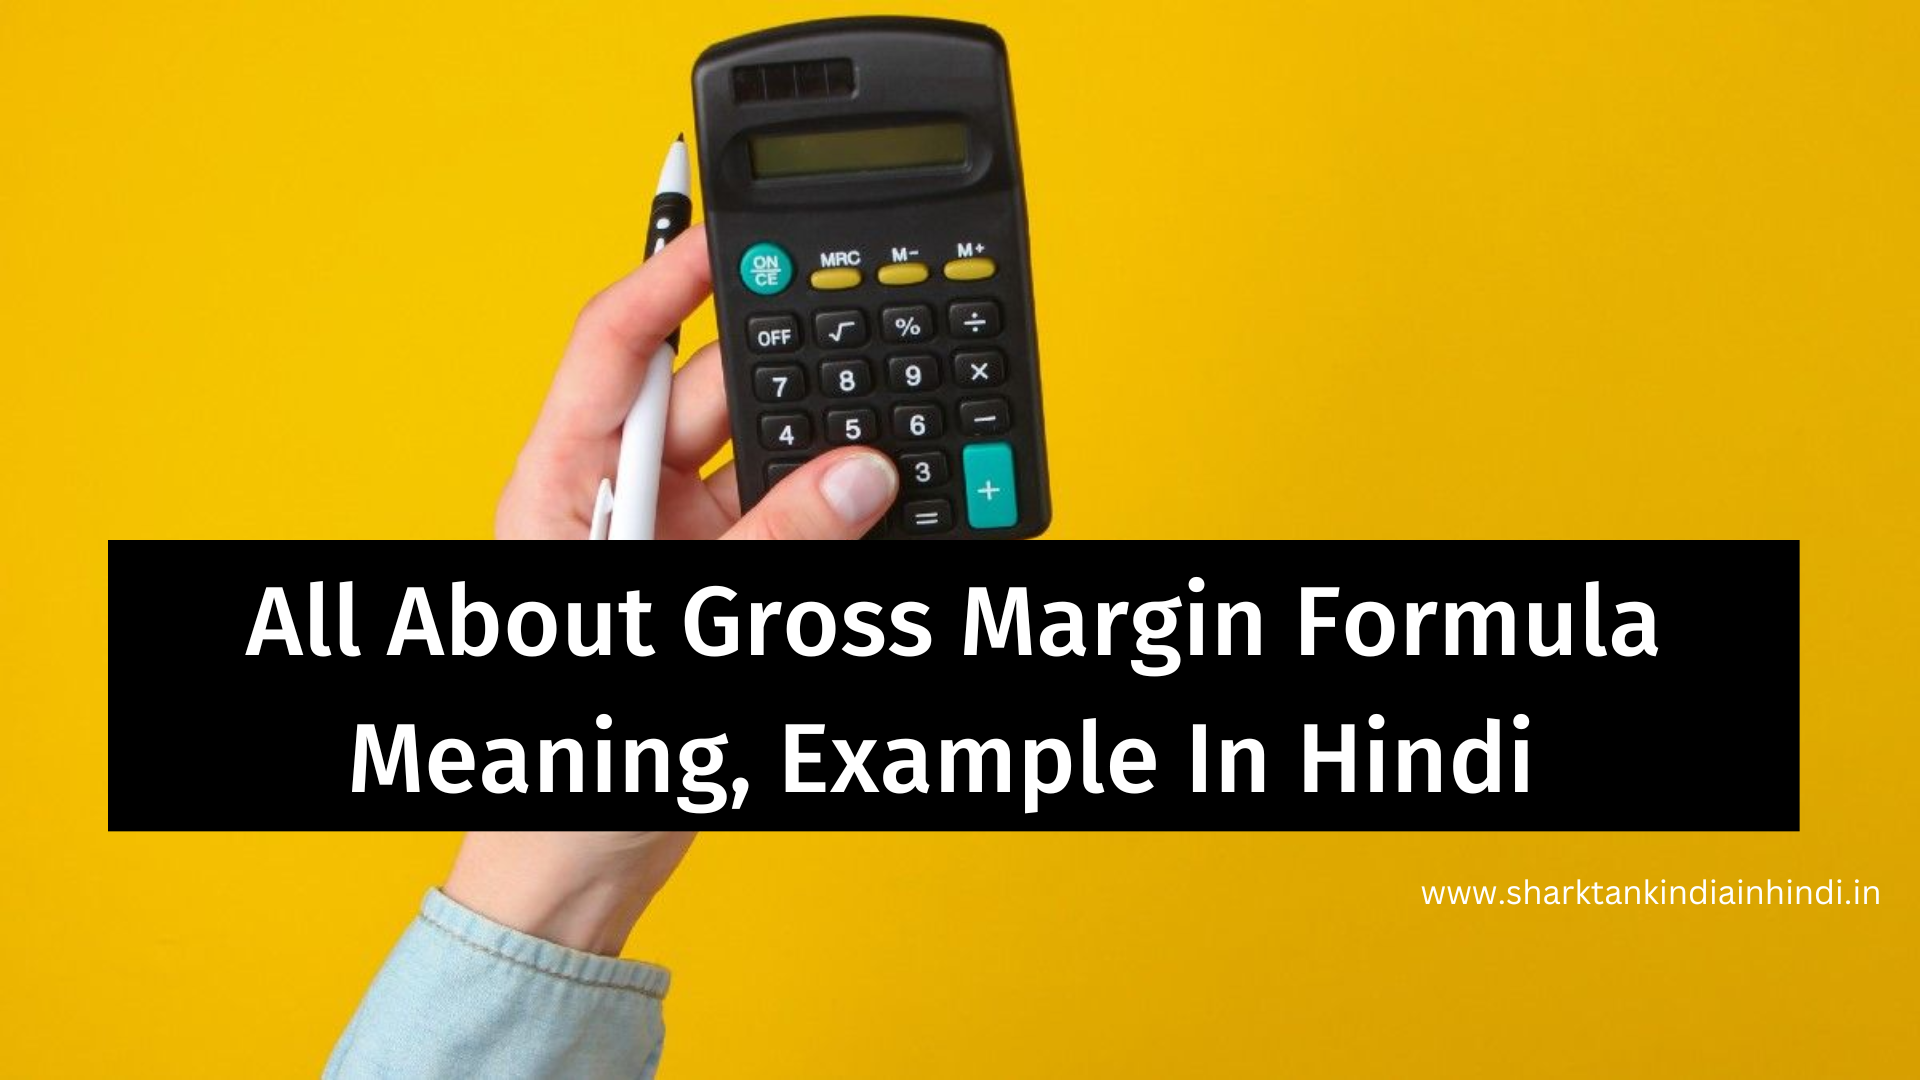 All About Gross Margin Formula Meaning, Example In Hindi